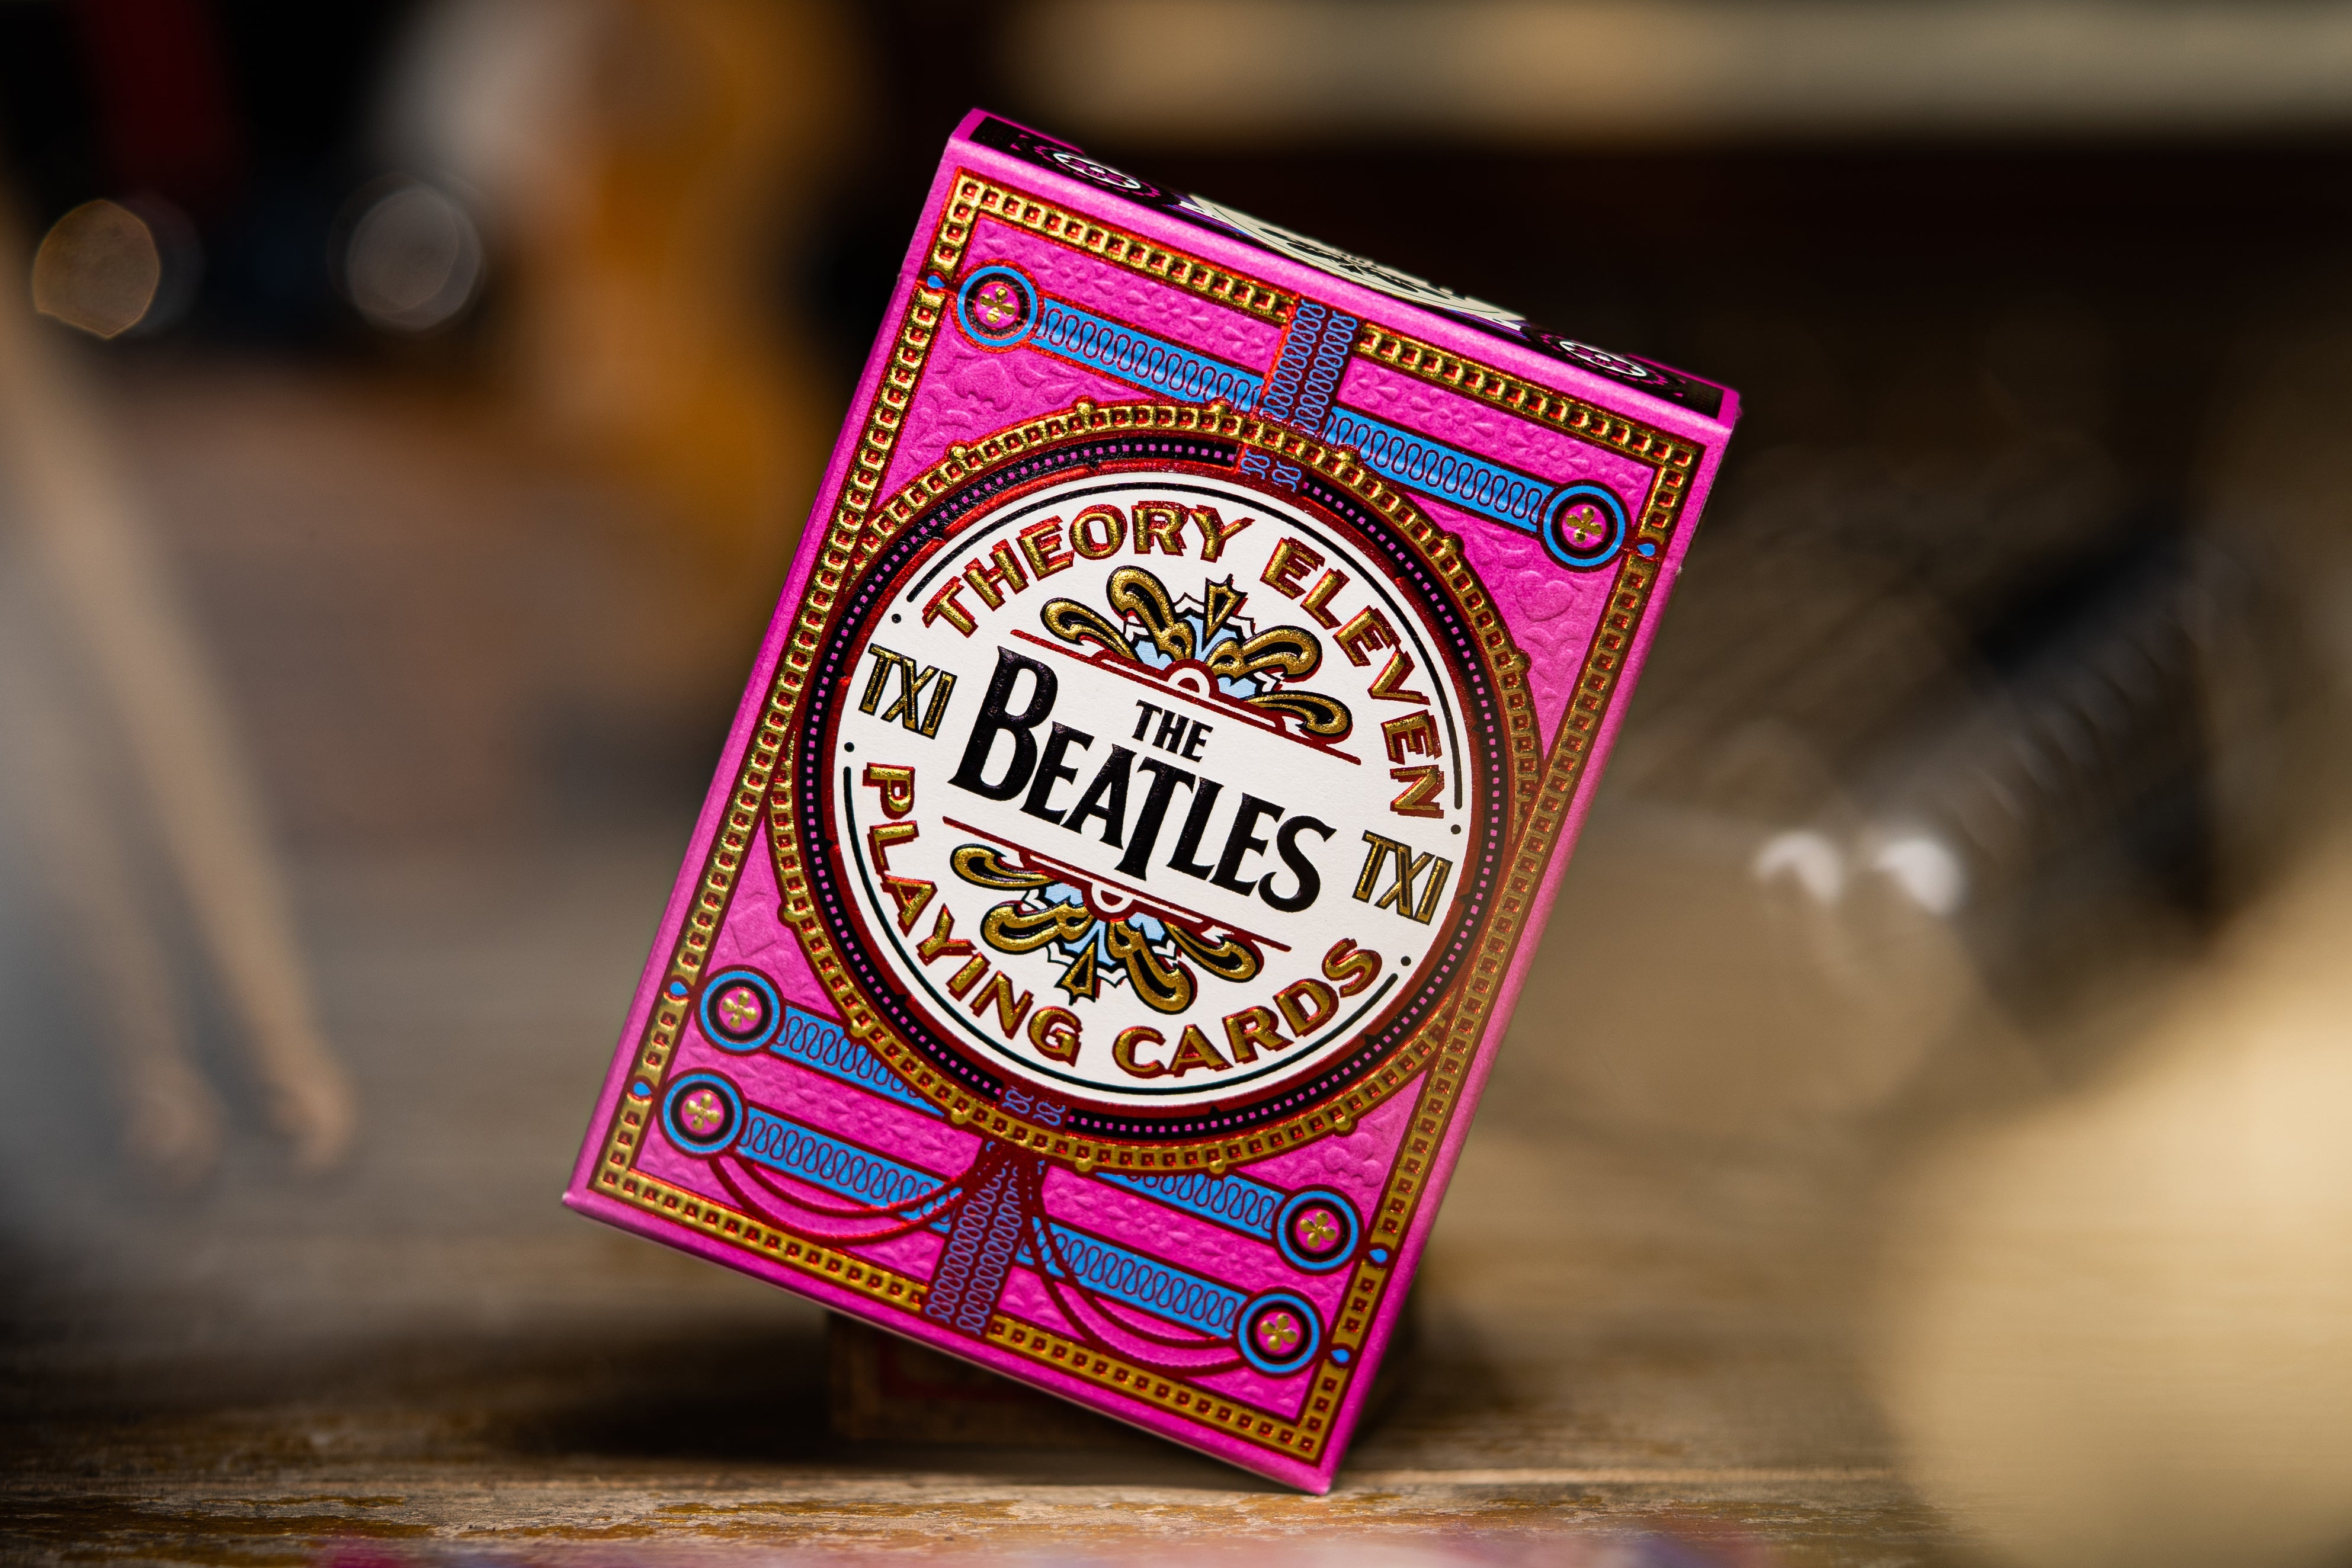 Pink- Beatles Playing Cards - Theory 11